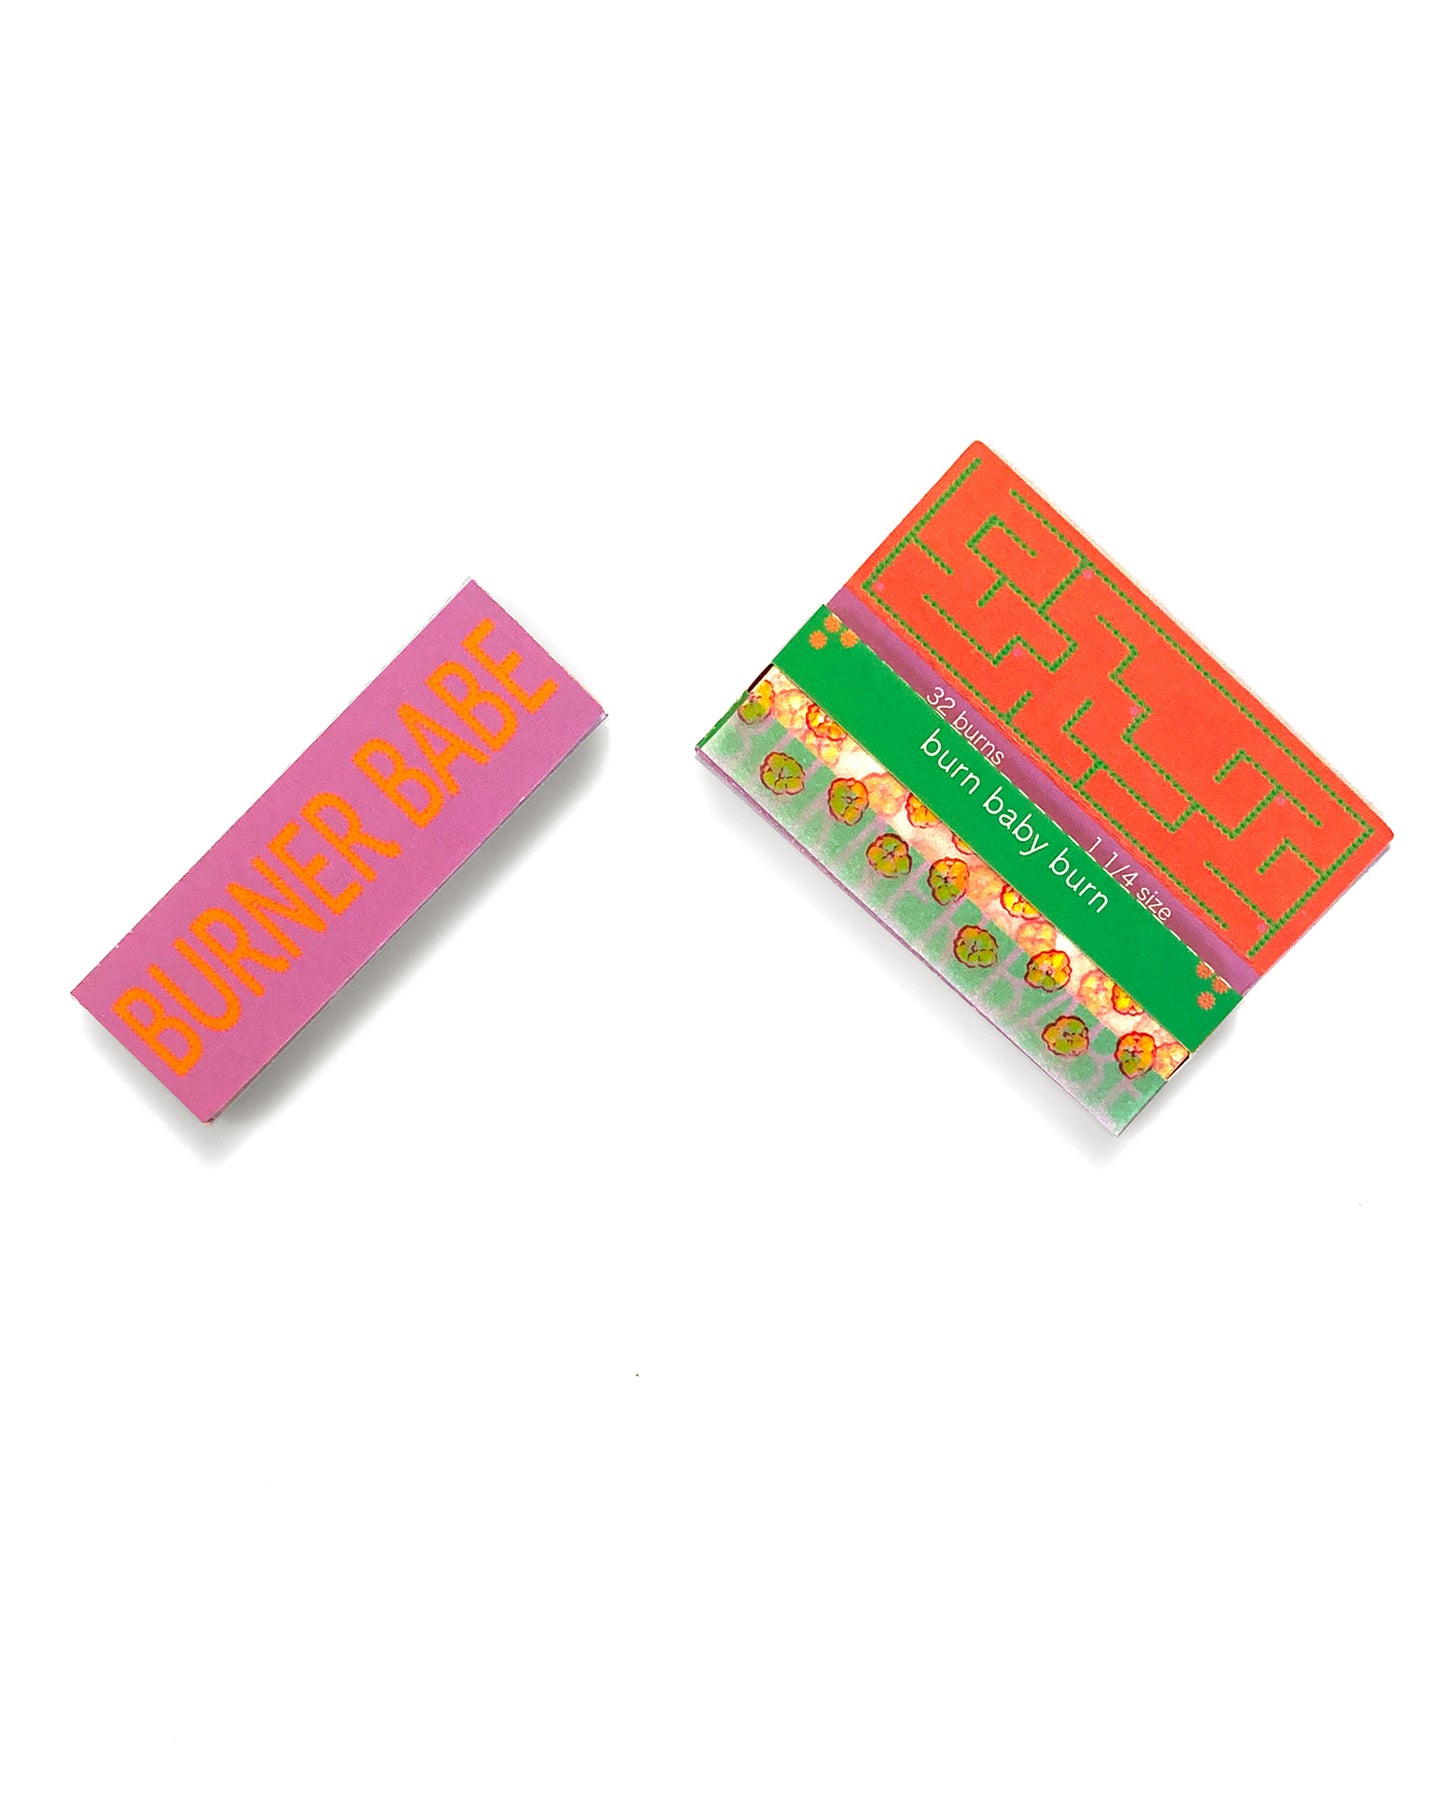 The Poppy Papers, set of 10: yellow poppy printed papers. These designer rolling papers are girly, pretty, vegan, cute, cool, standard size, high quality, even burn, natural dyes, best tasting, slow burn.